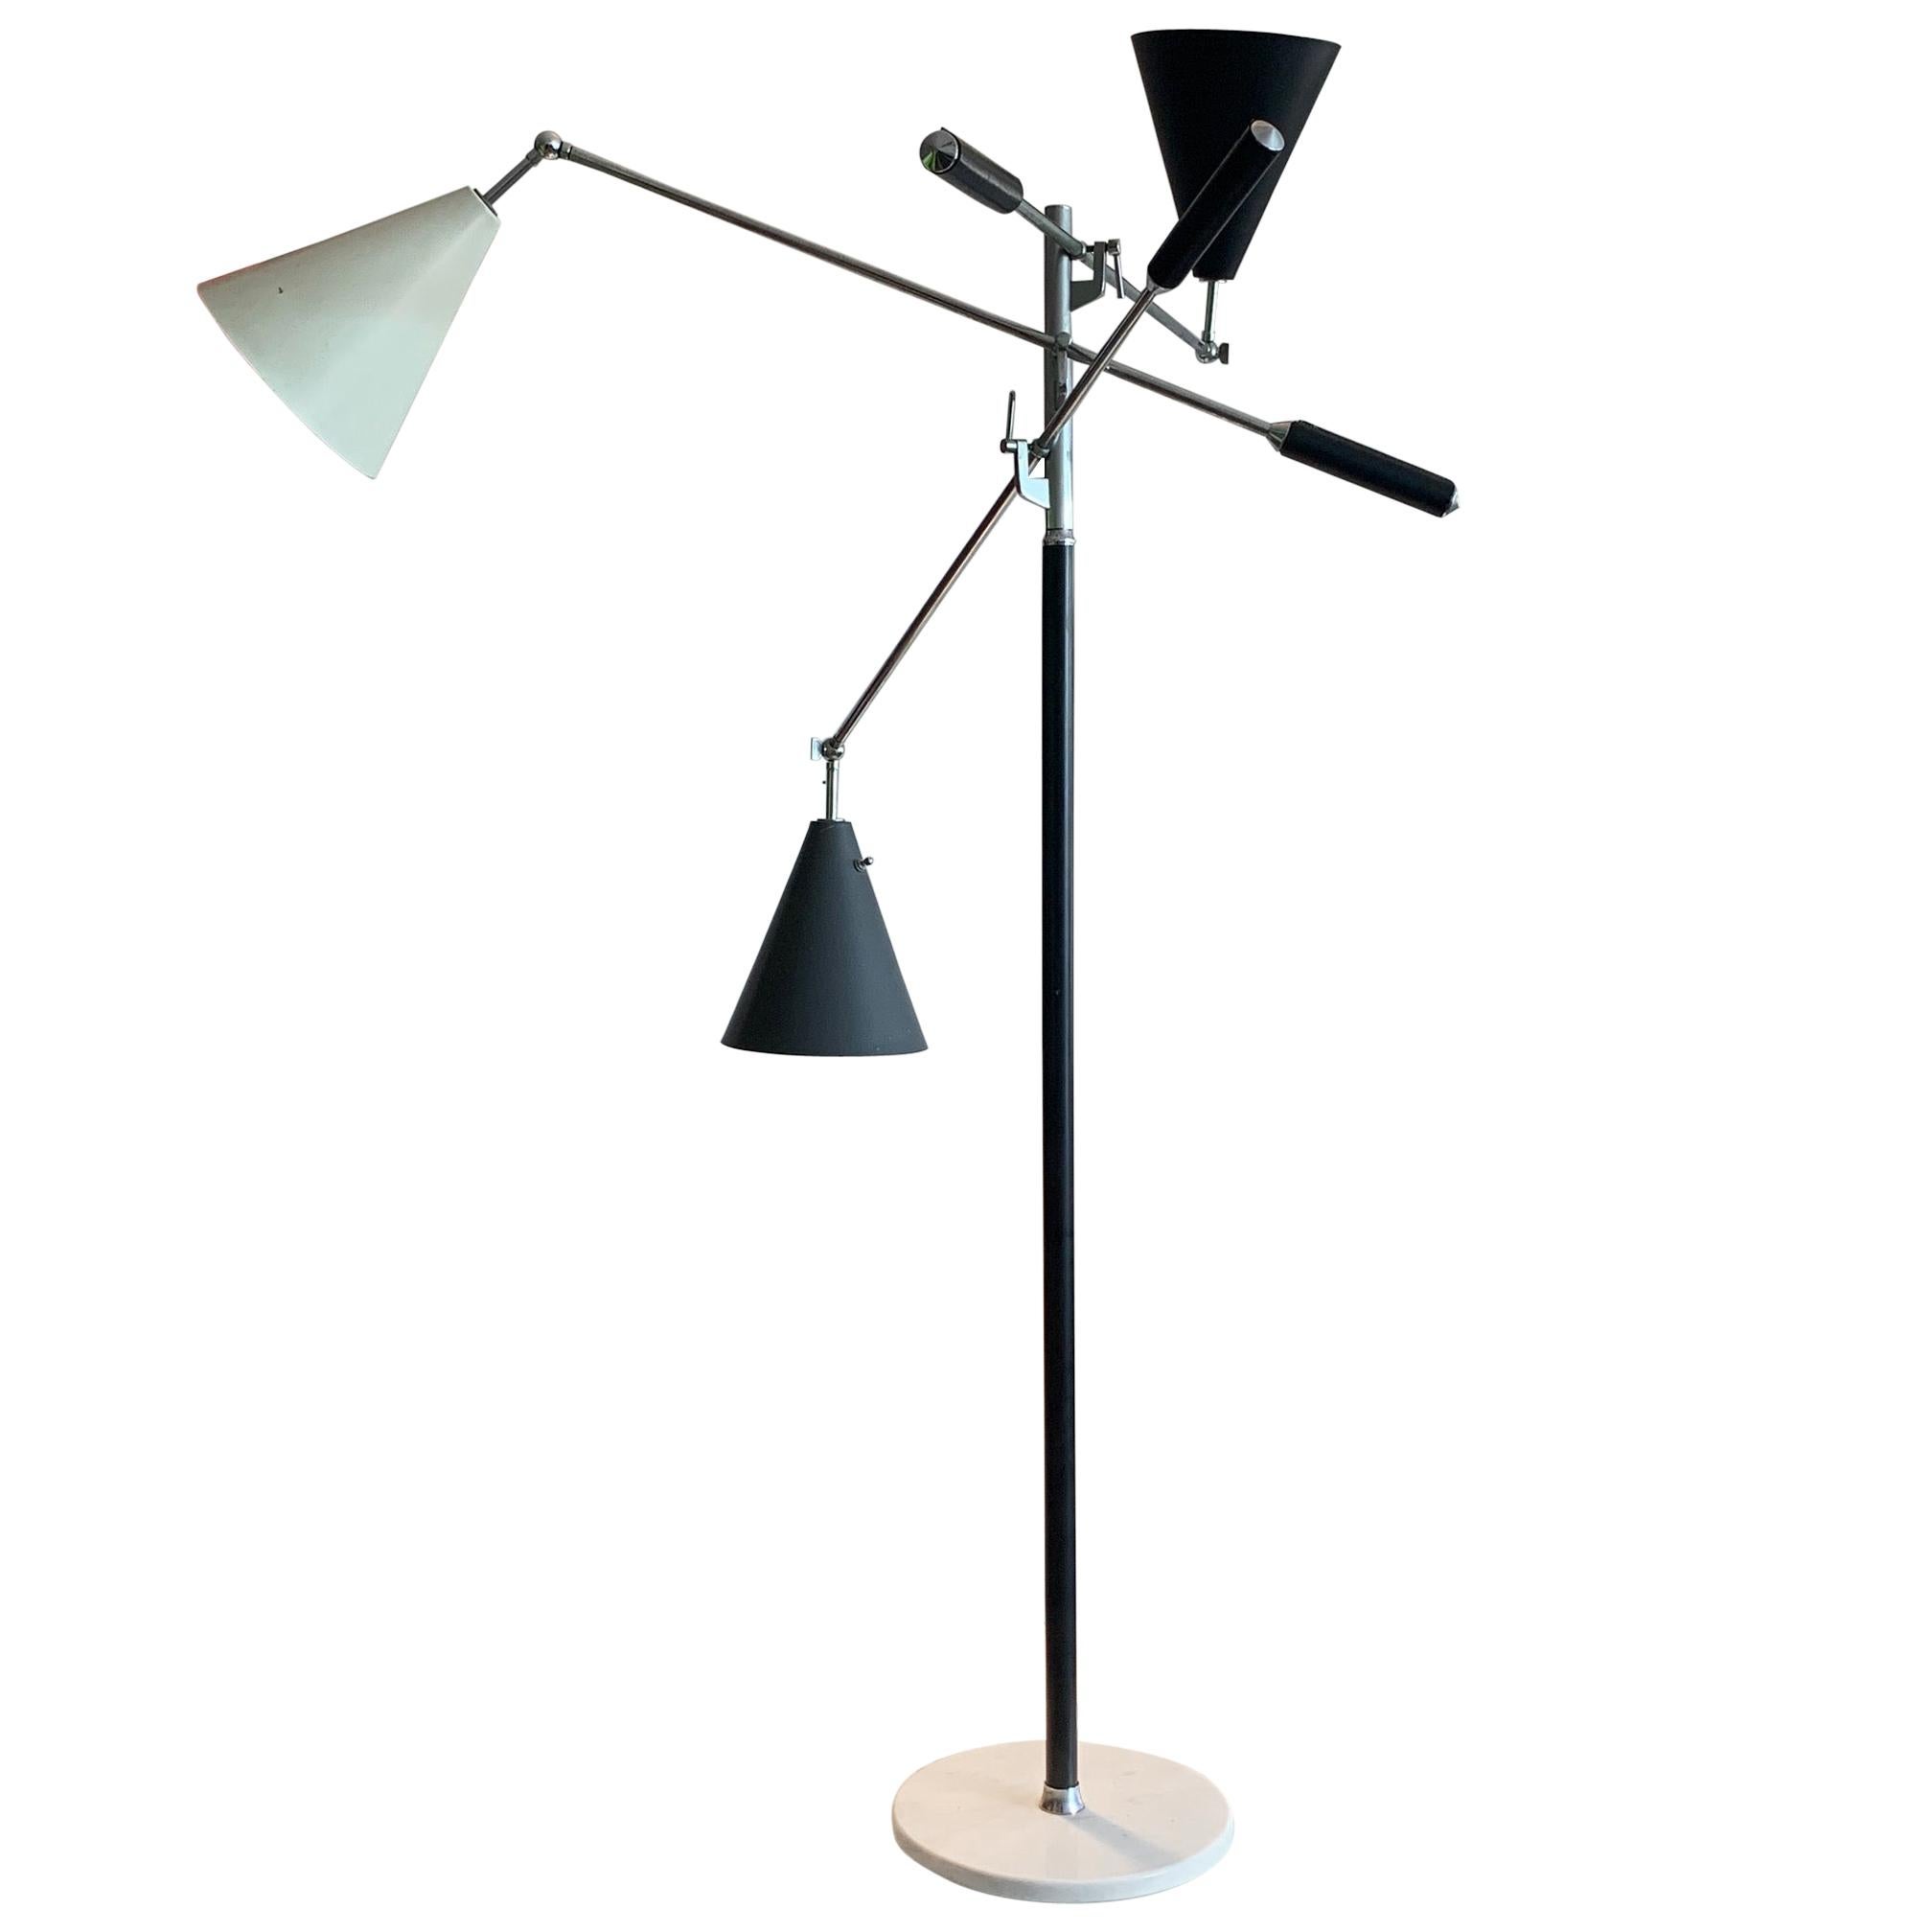 Classic Arredoluce Triennale Floor Lamp with White Marble Base